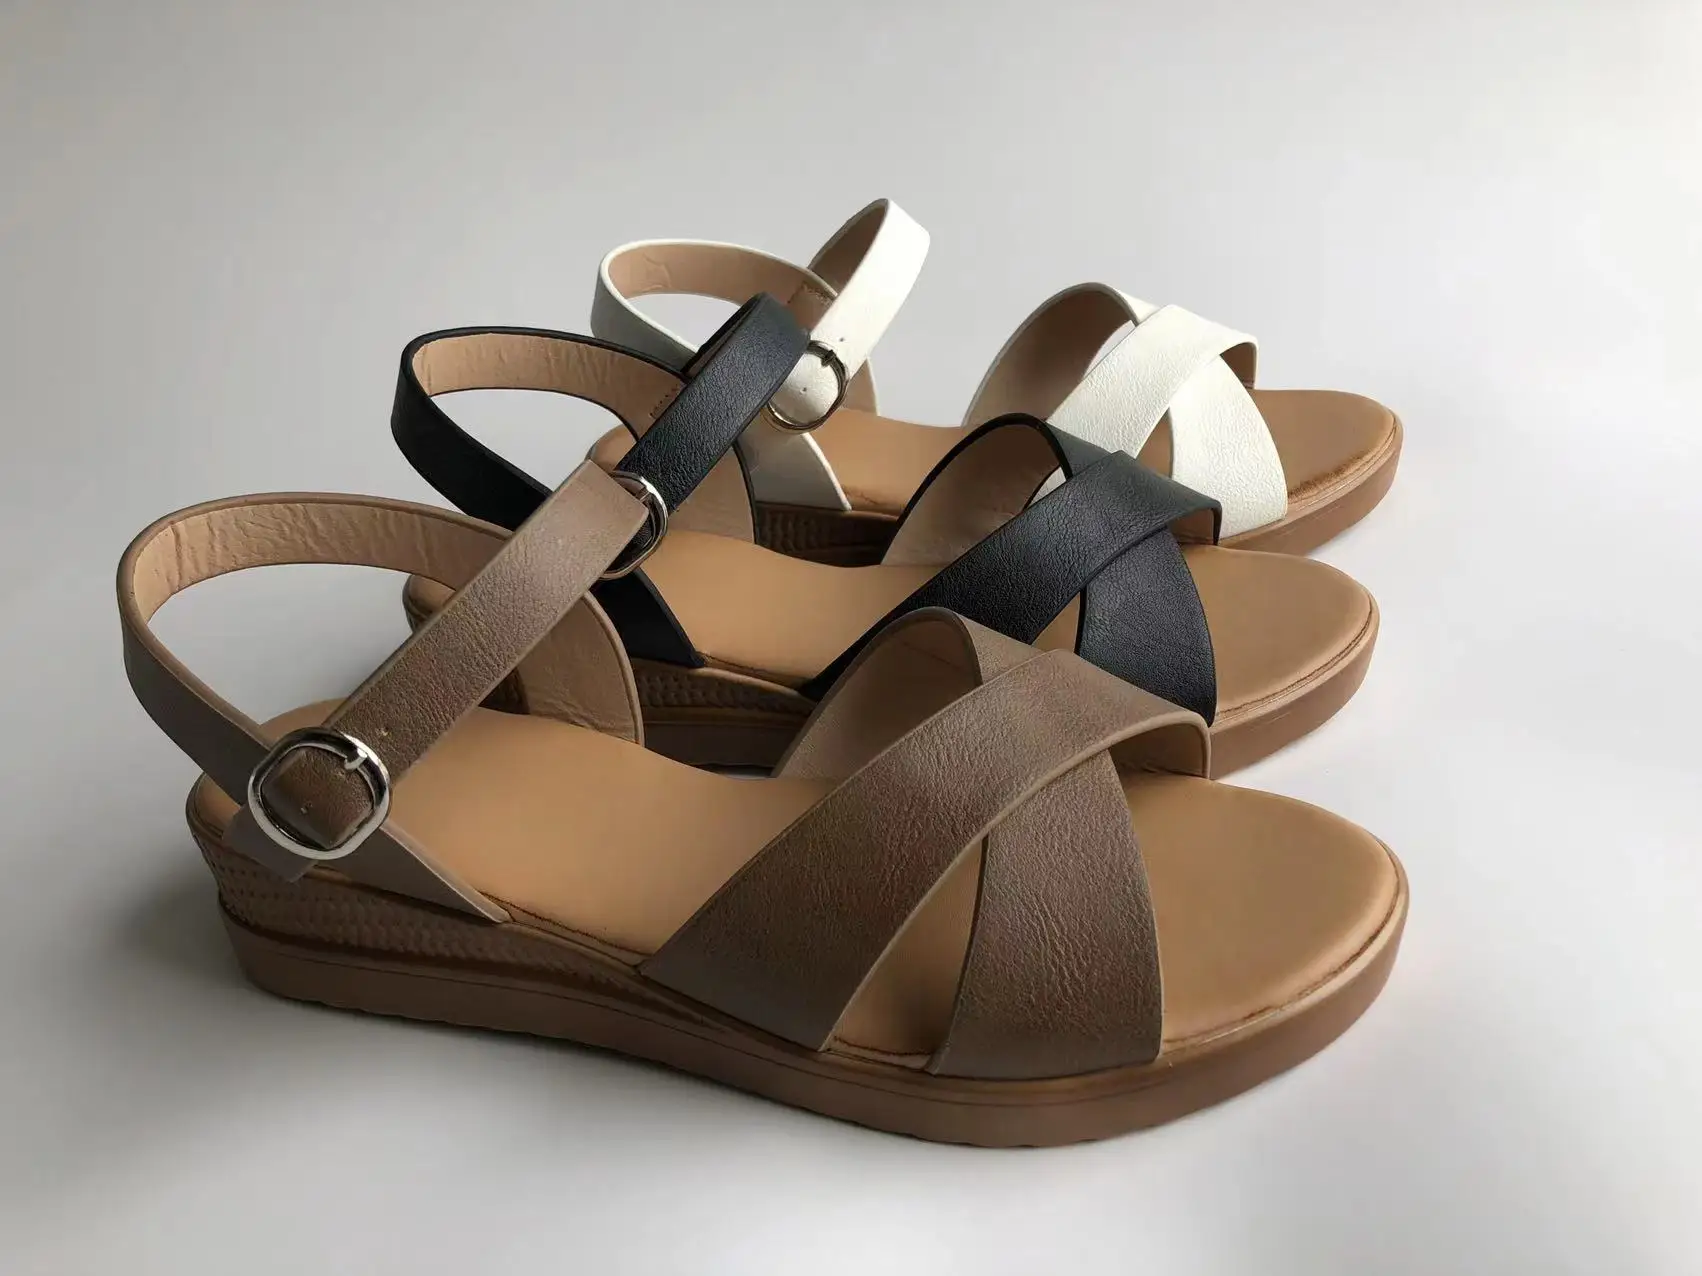 female wedge sandals shoes High Quality Hot Selling women comfort sandals